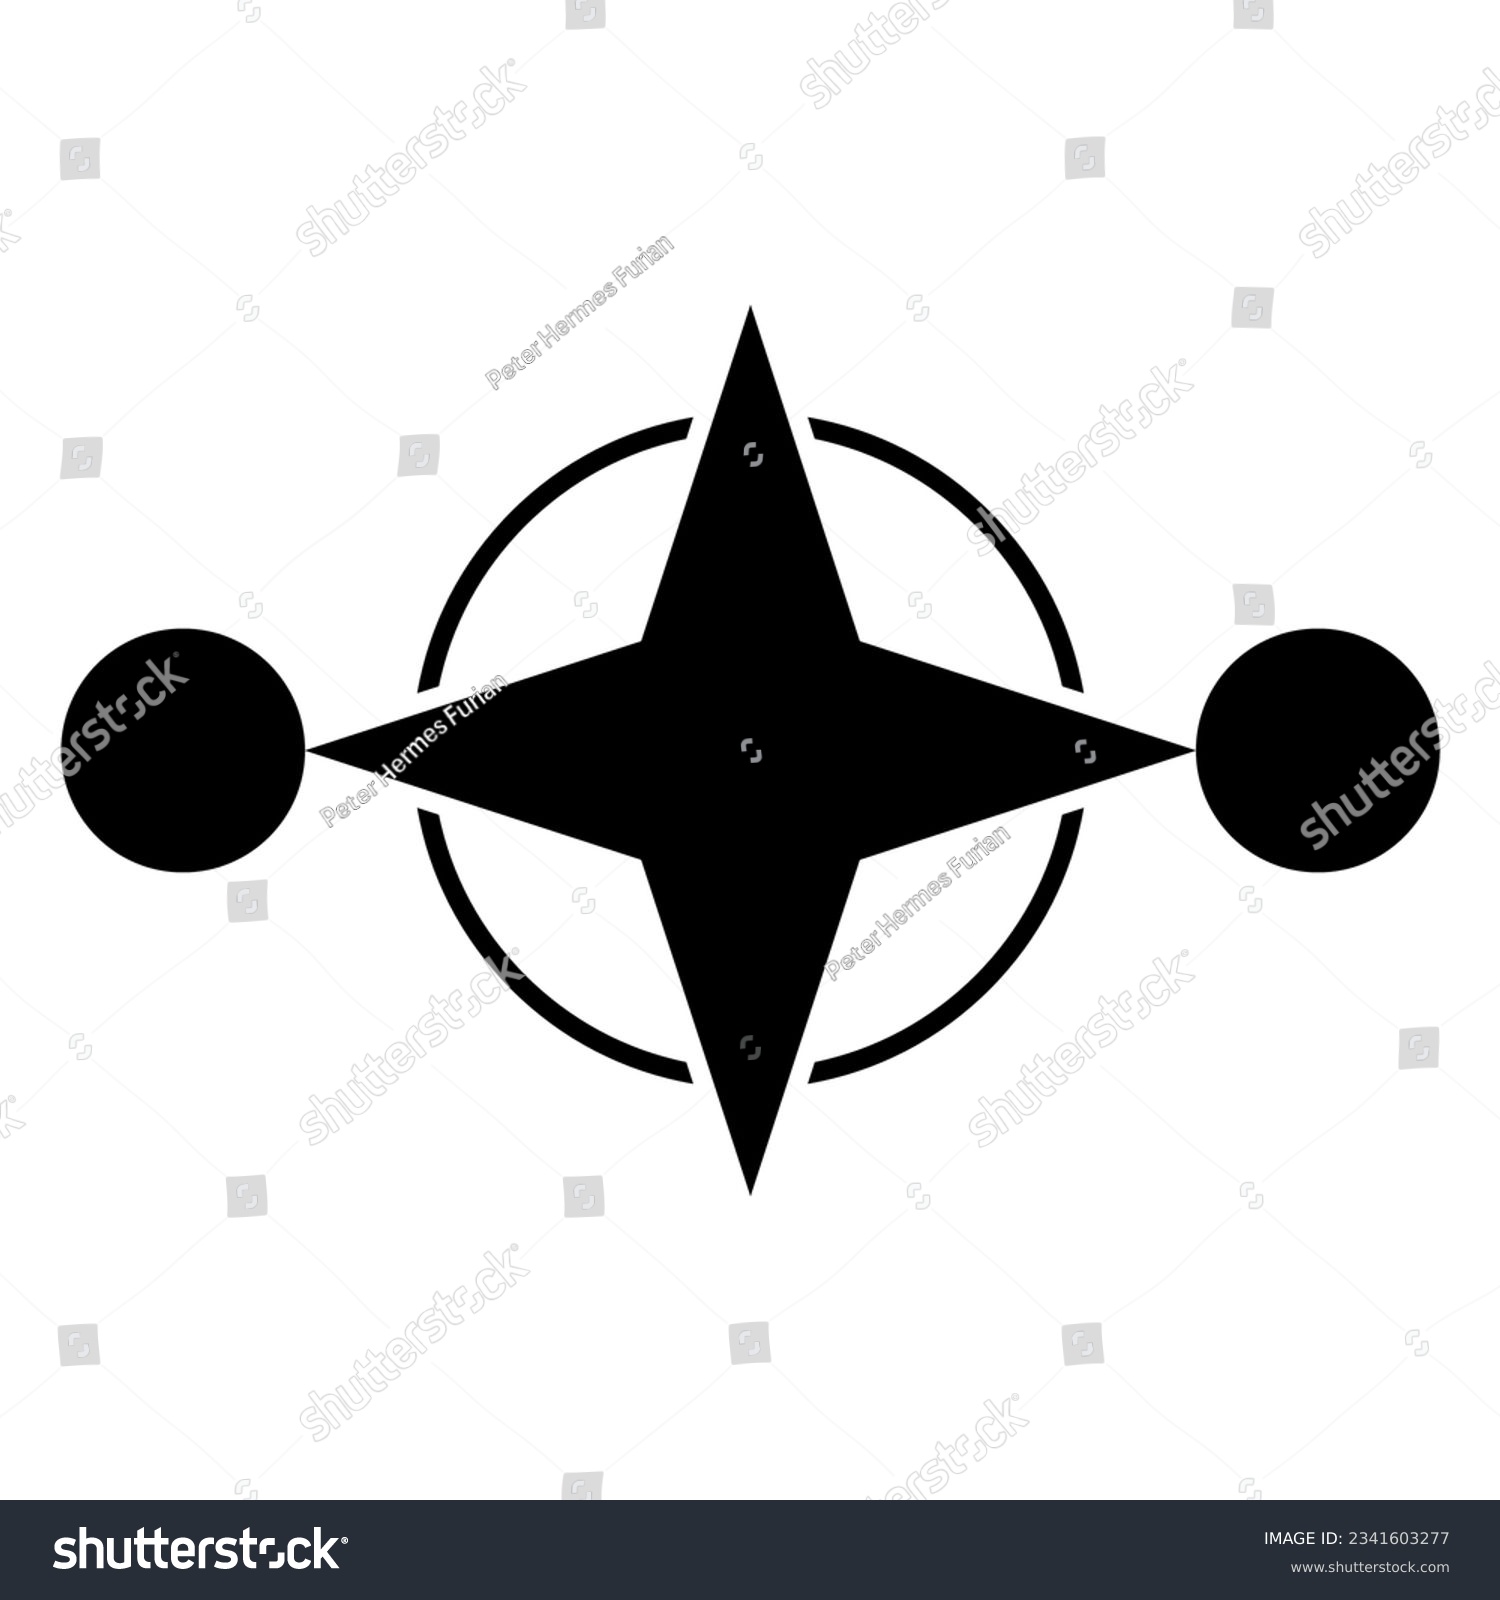 SVG of Compass rose in a ring with circles. Four-pointed star with frame and with one circle on the left and one on the right side. Modeled on a crop circle pattern, found at Preston Candover in Hampshire. svg